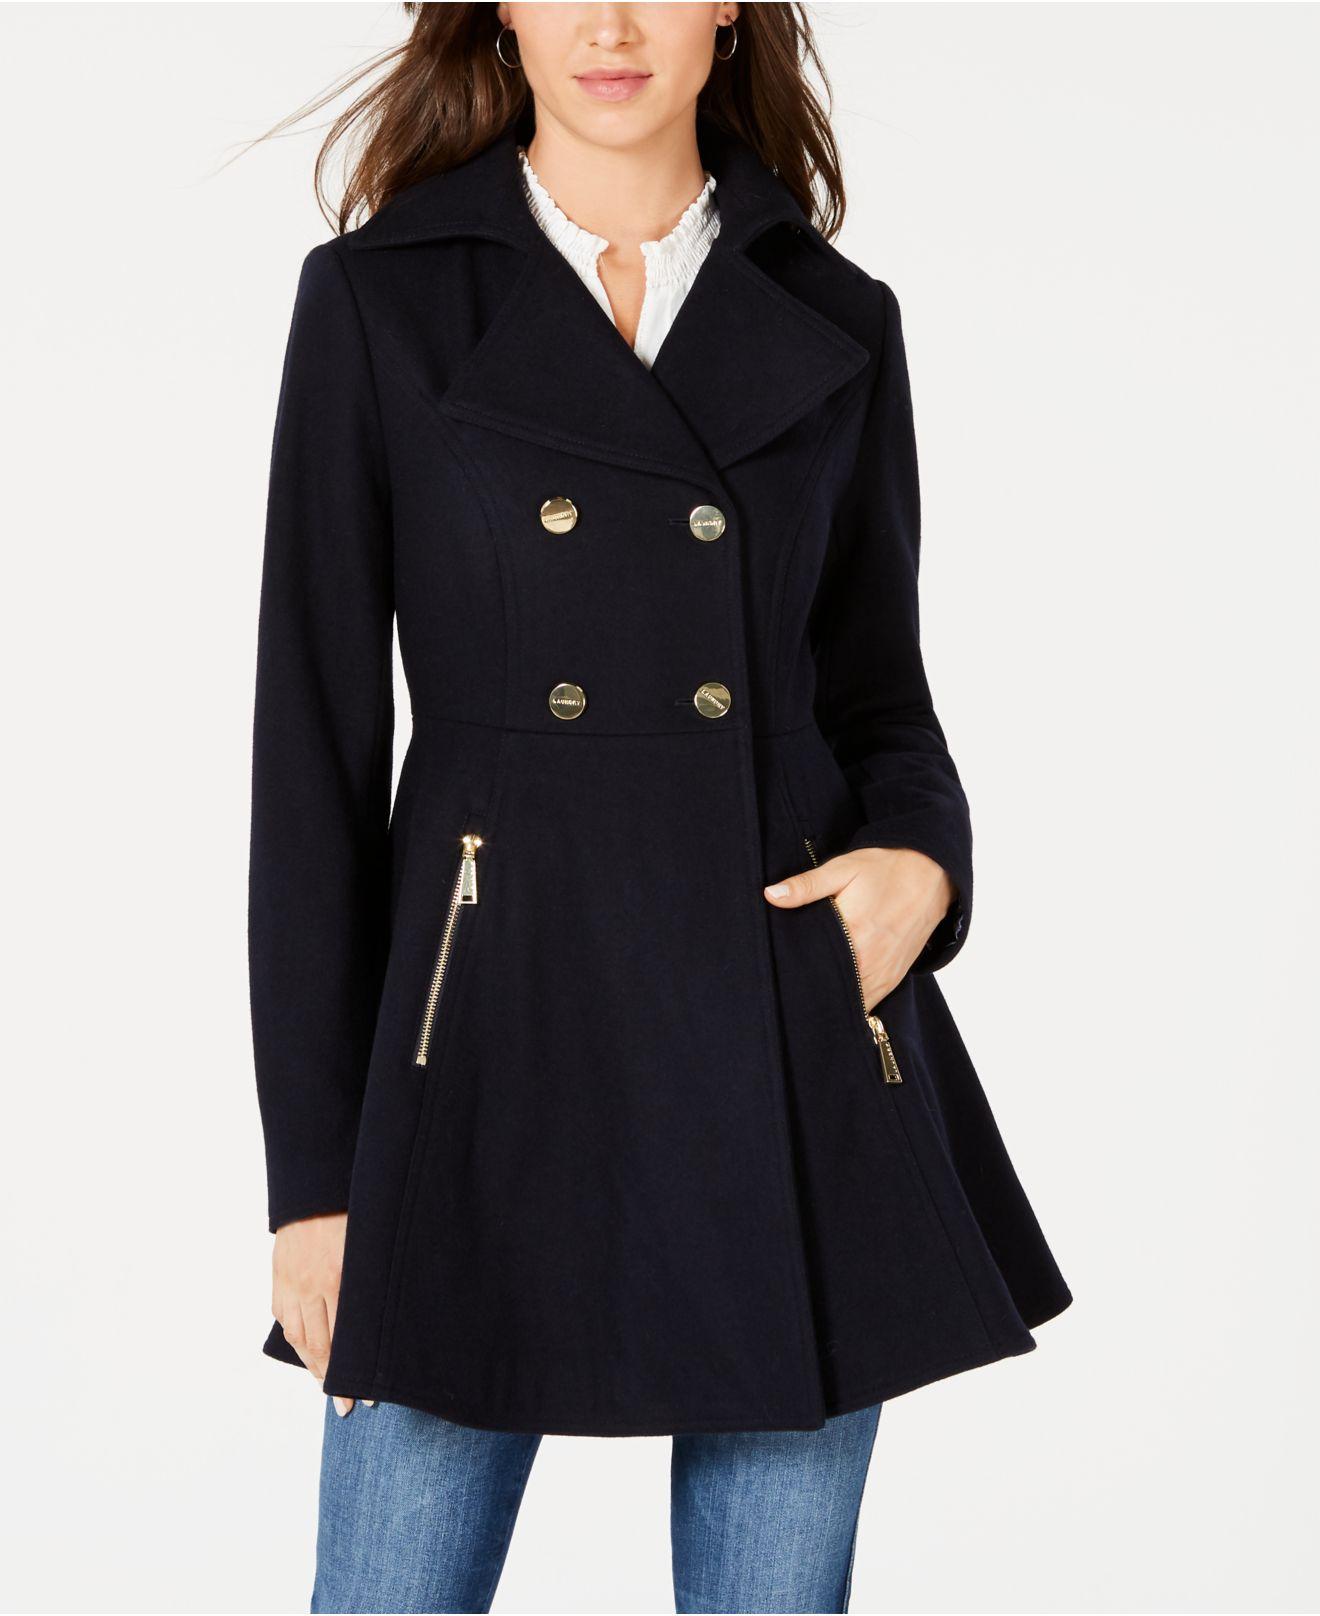 Laundry by Shelli Segal Wool Petite Double-breasted Skirted Coat in ...